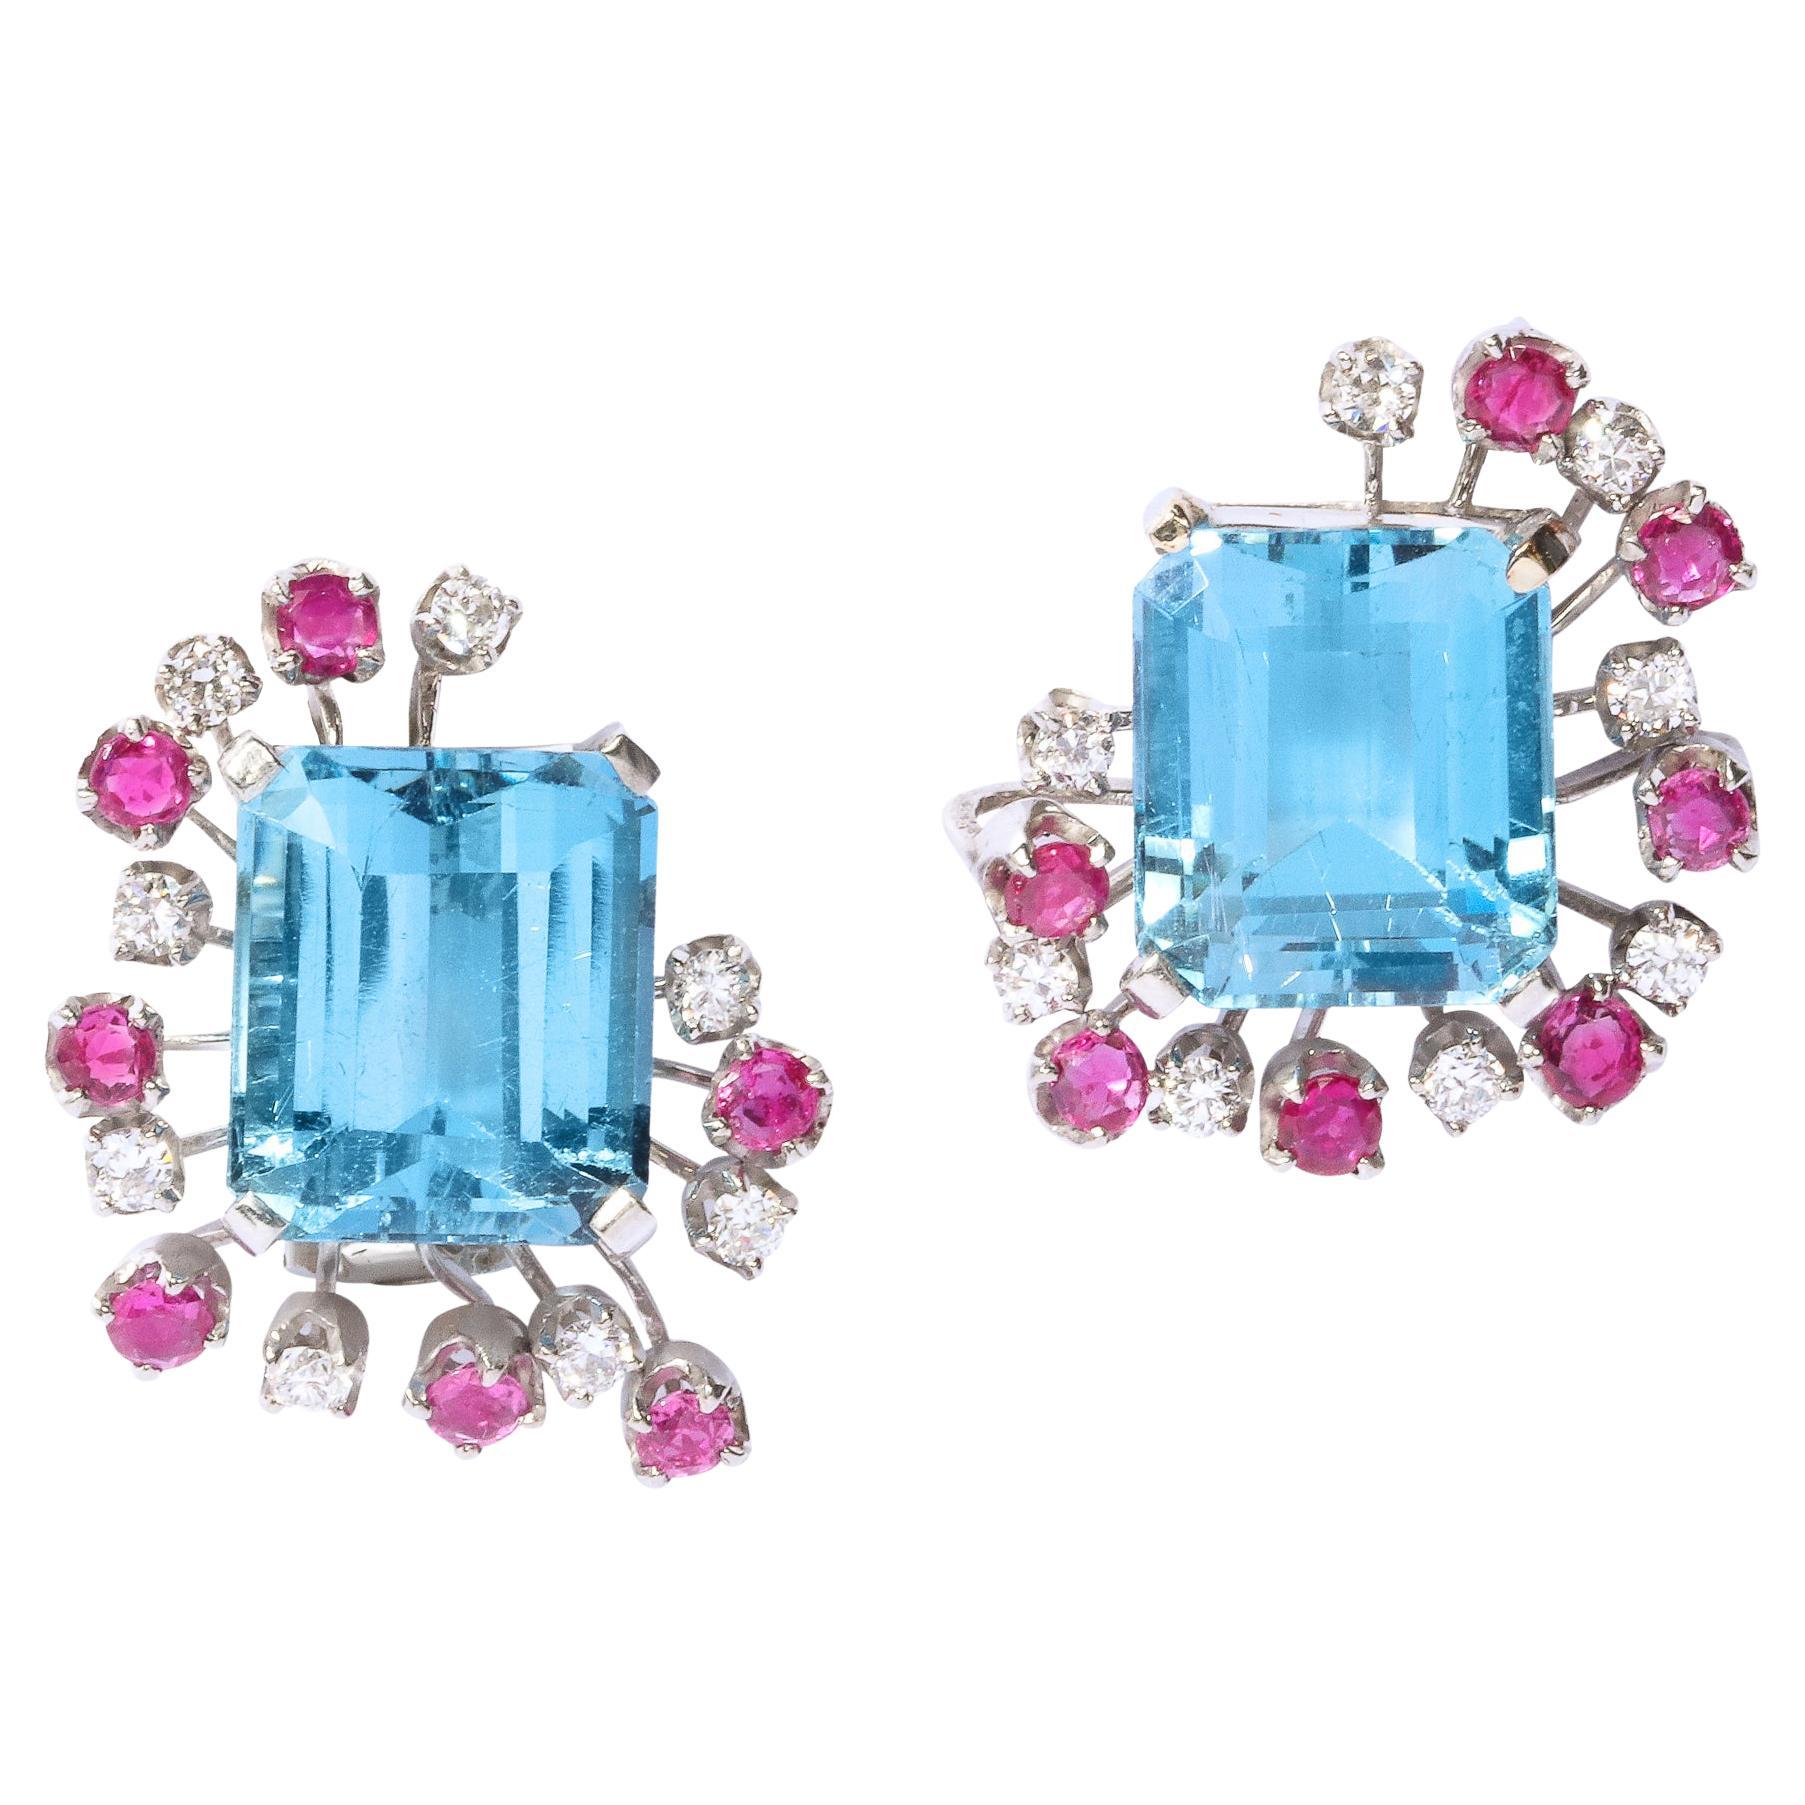 1940s 12 Carat Aquamarine and 14K White Gold Earrings with Diamonds and Rubies